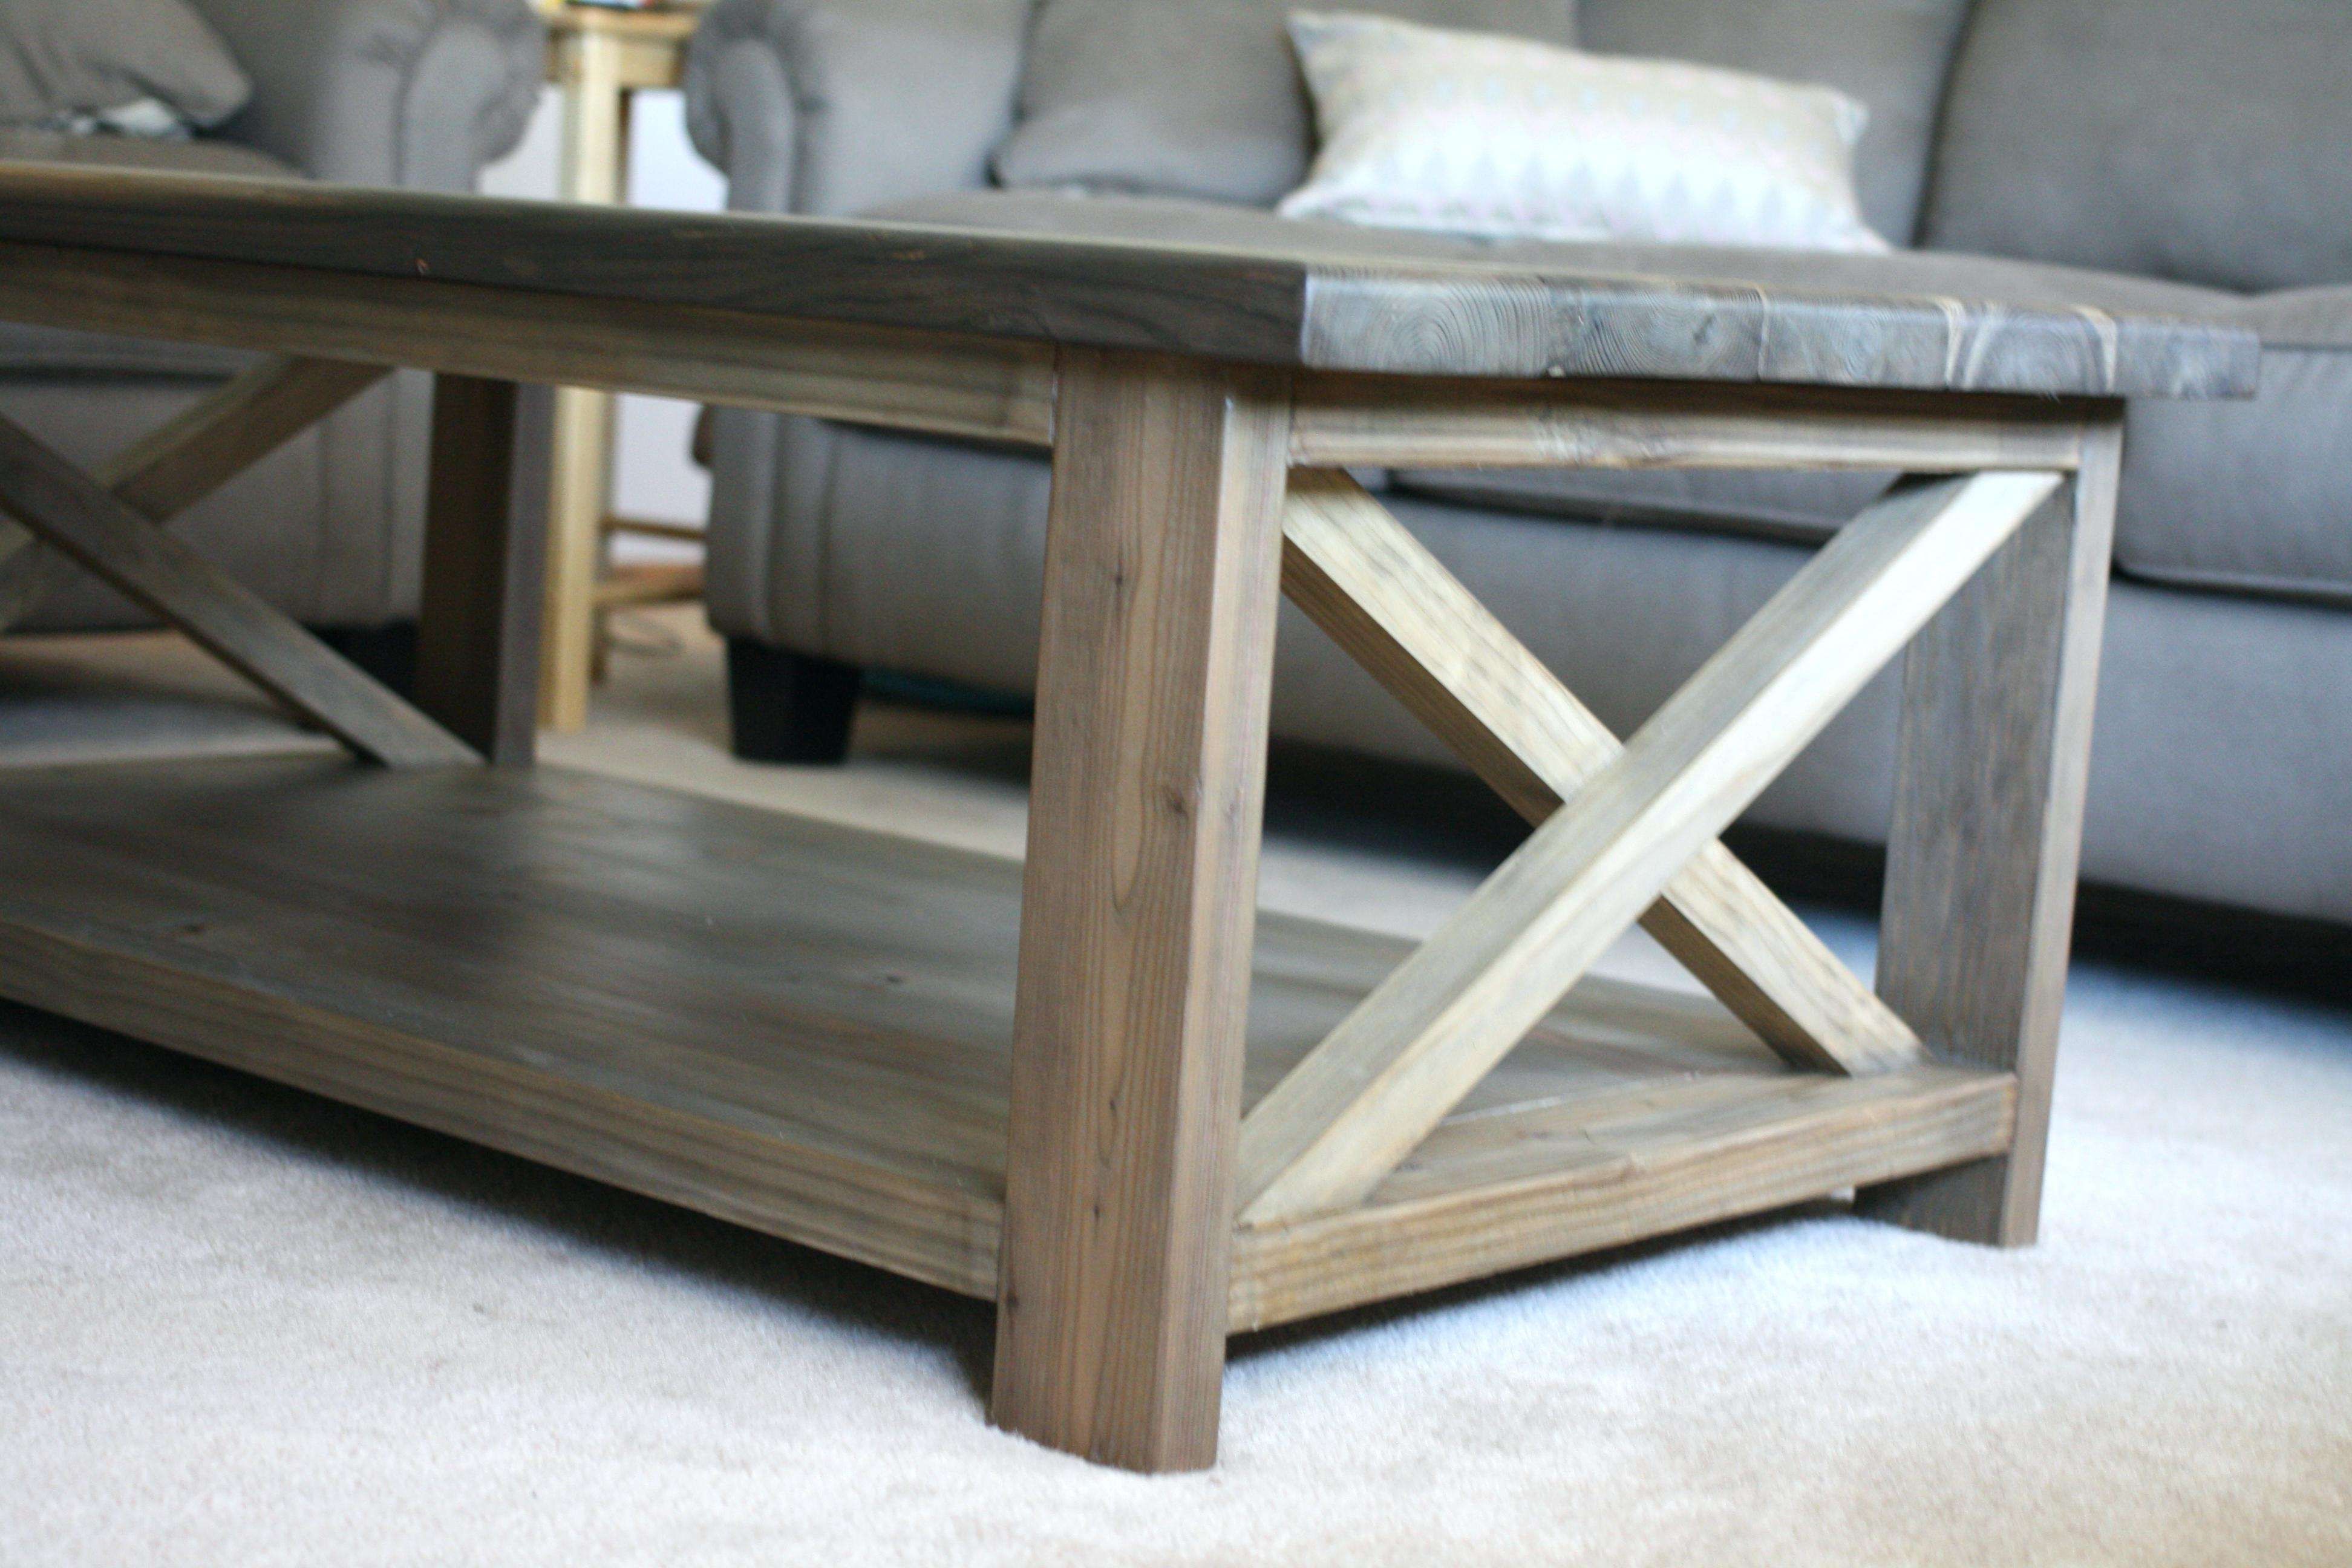 Rustic Coffee Table For Sale Ontario Tv Stand And Set Calgary With Rustic Coffee Table And Tv Stands (Gallery 3 of 15)